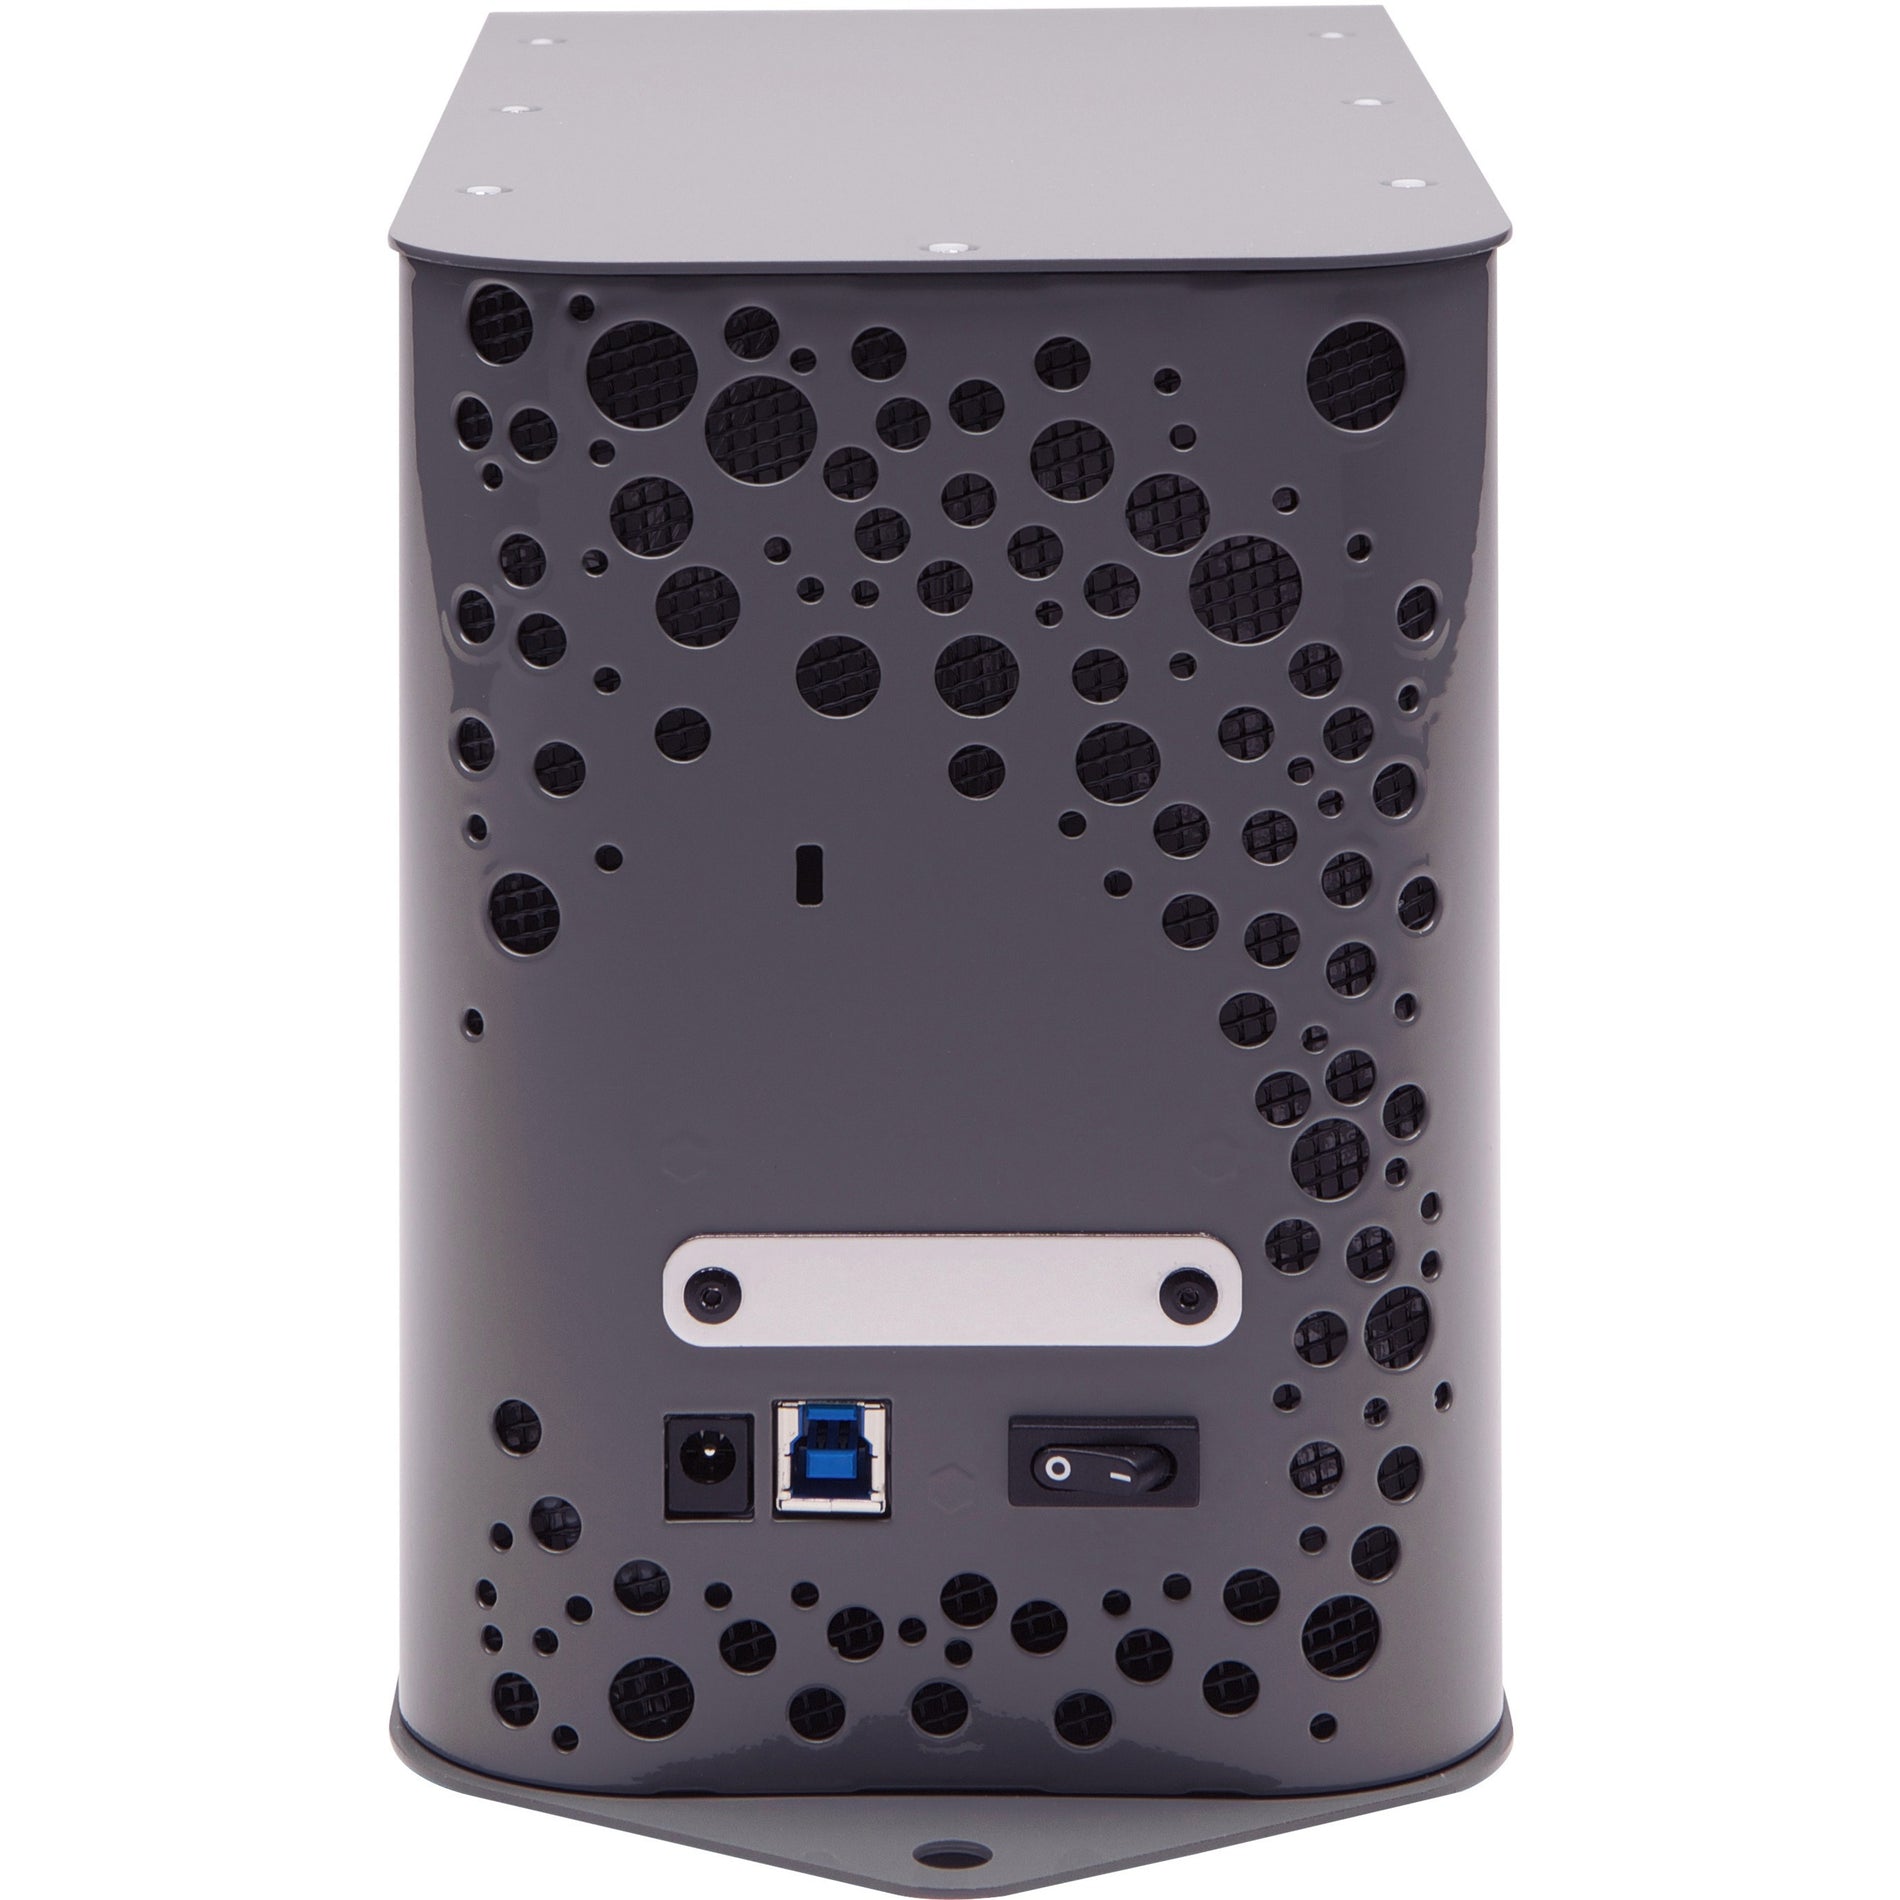 ioSafe SK3TB Solo G3 3 TB USB 3.0 Fireproof and Waterproof External Hard Drive, Data Recovery Service Included